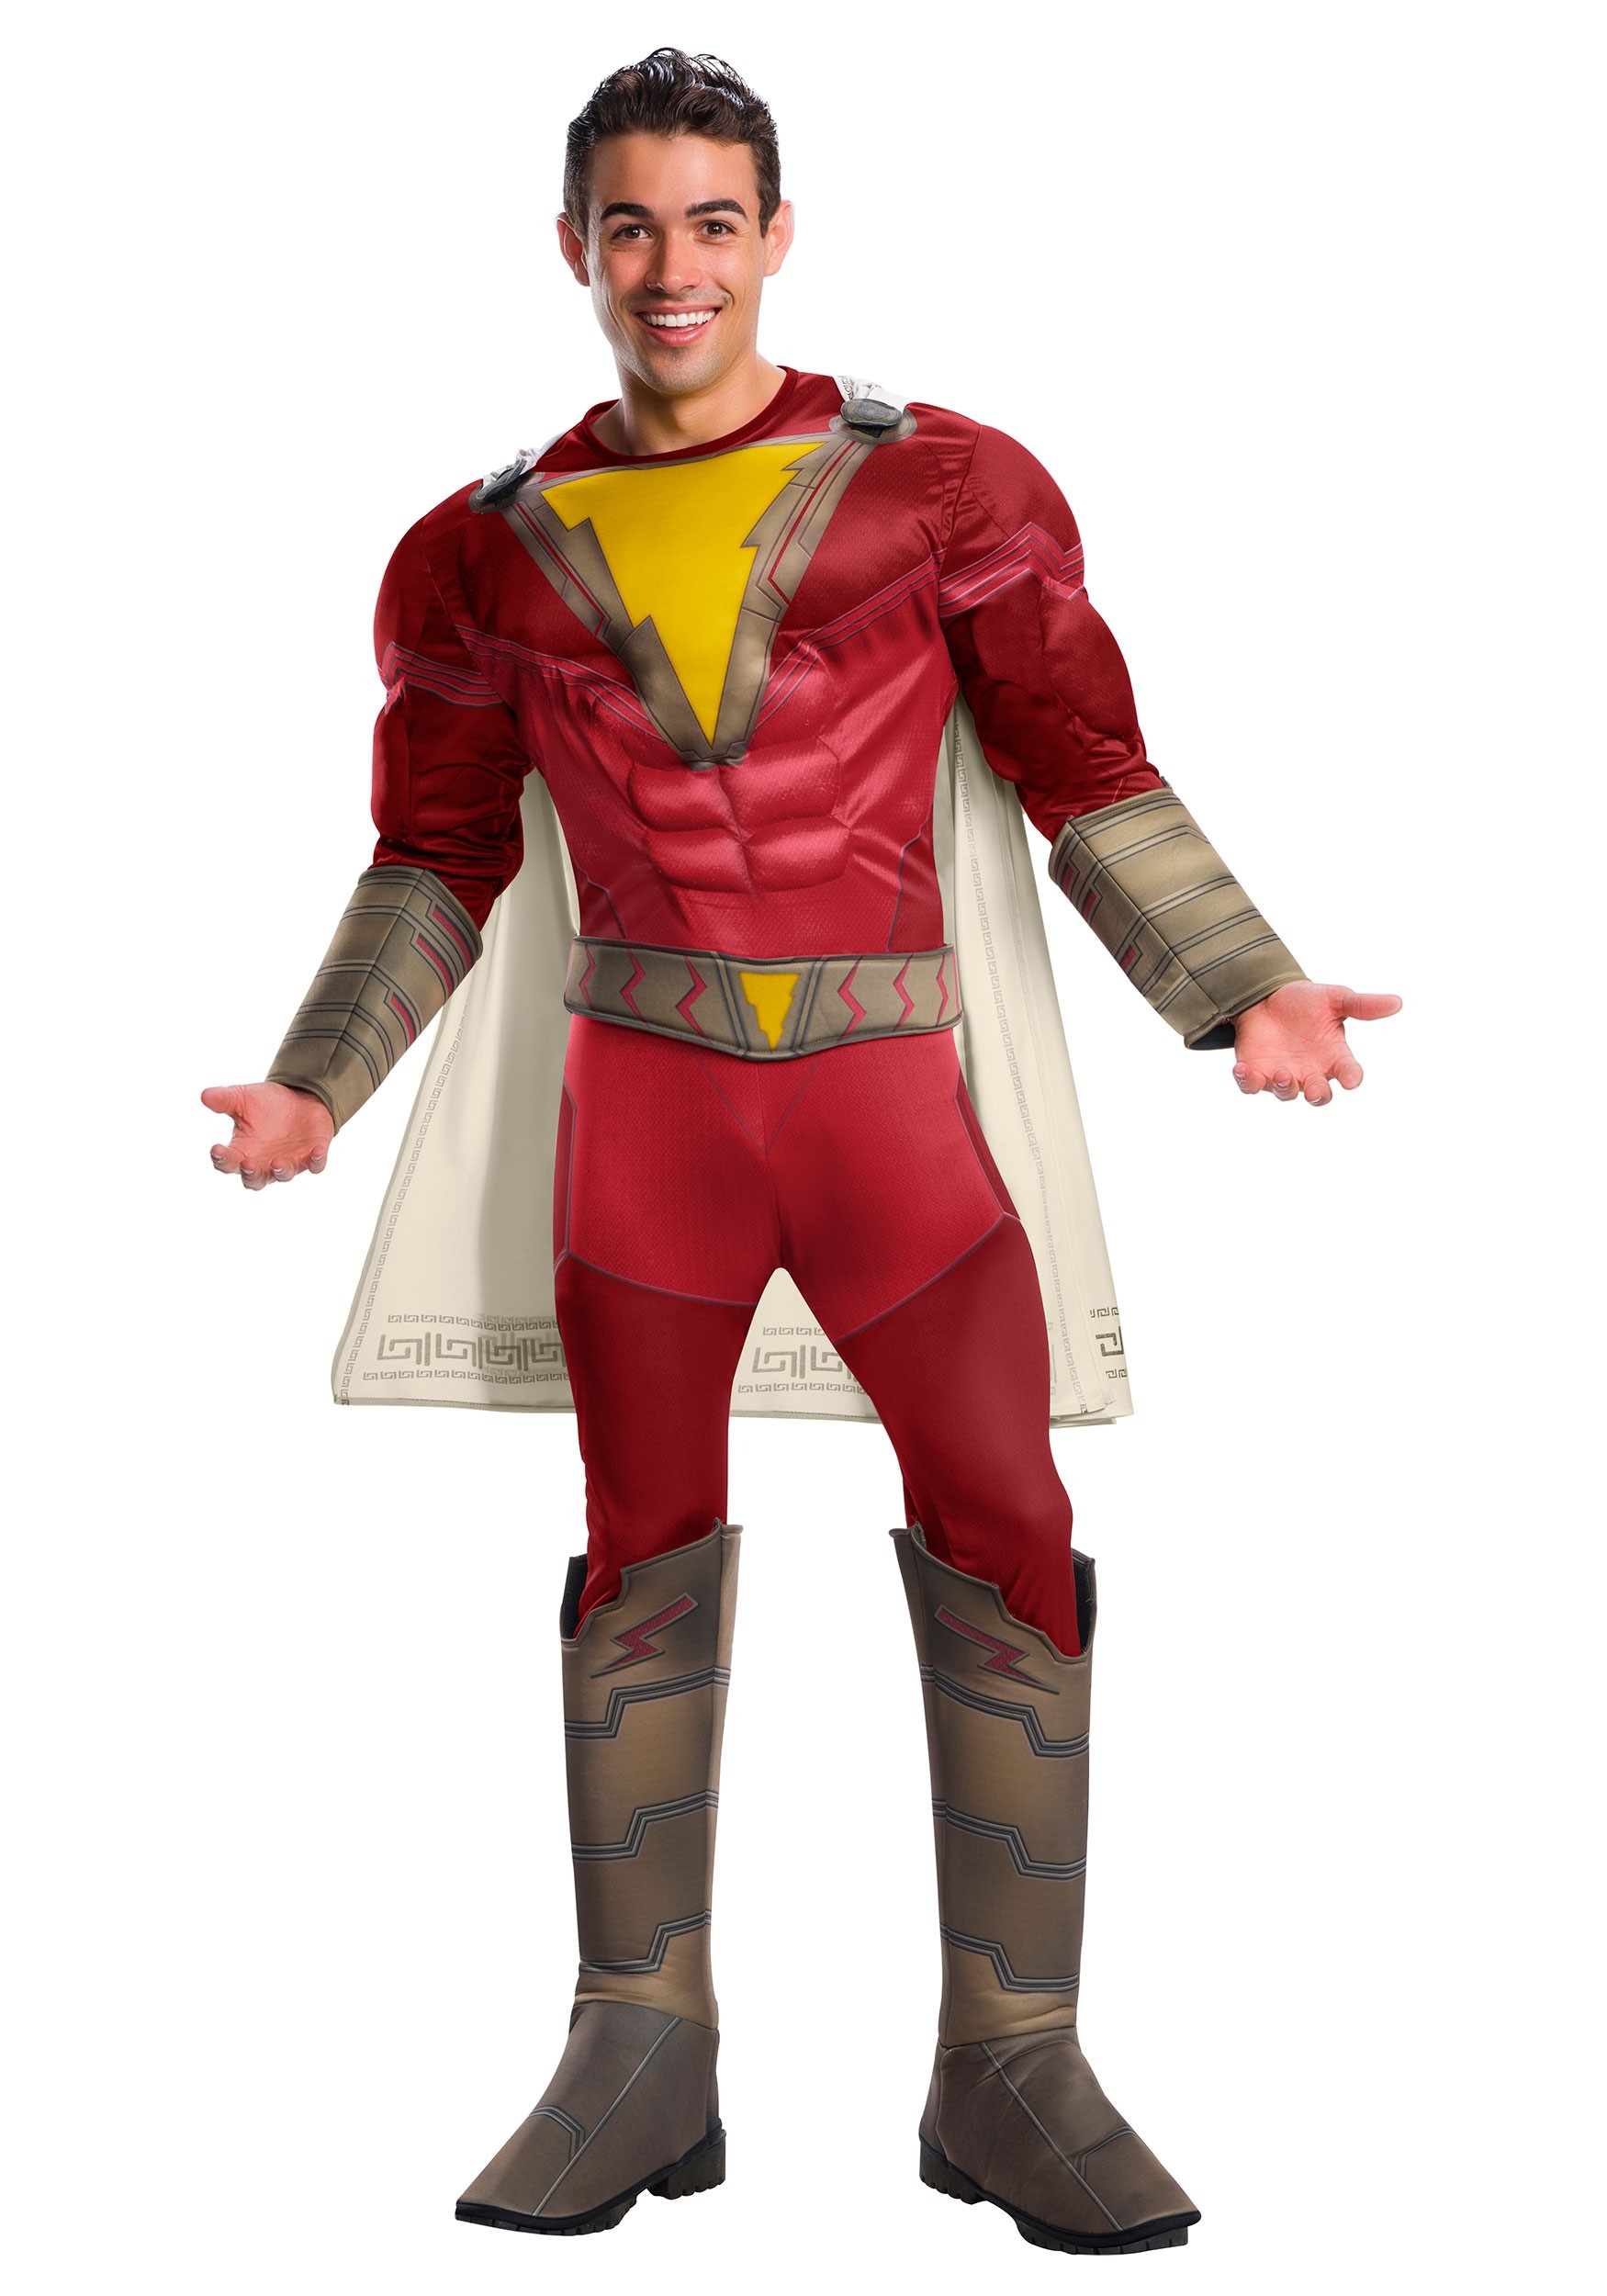 Image of Shazam! Deluxe Costume for Adults ID RU700799-ST